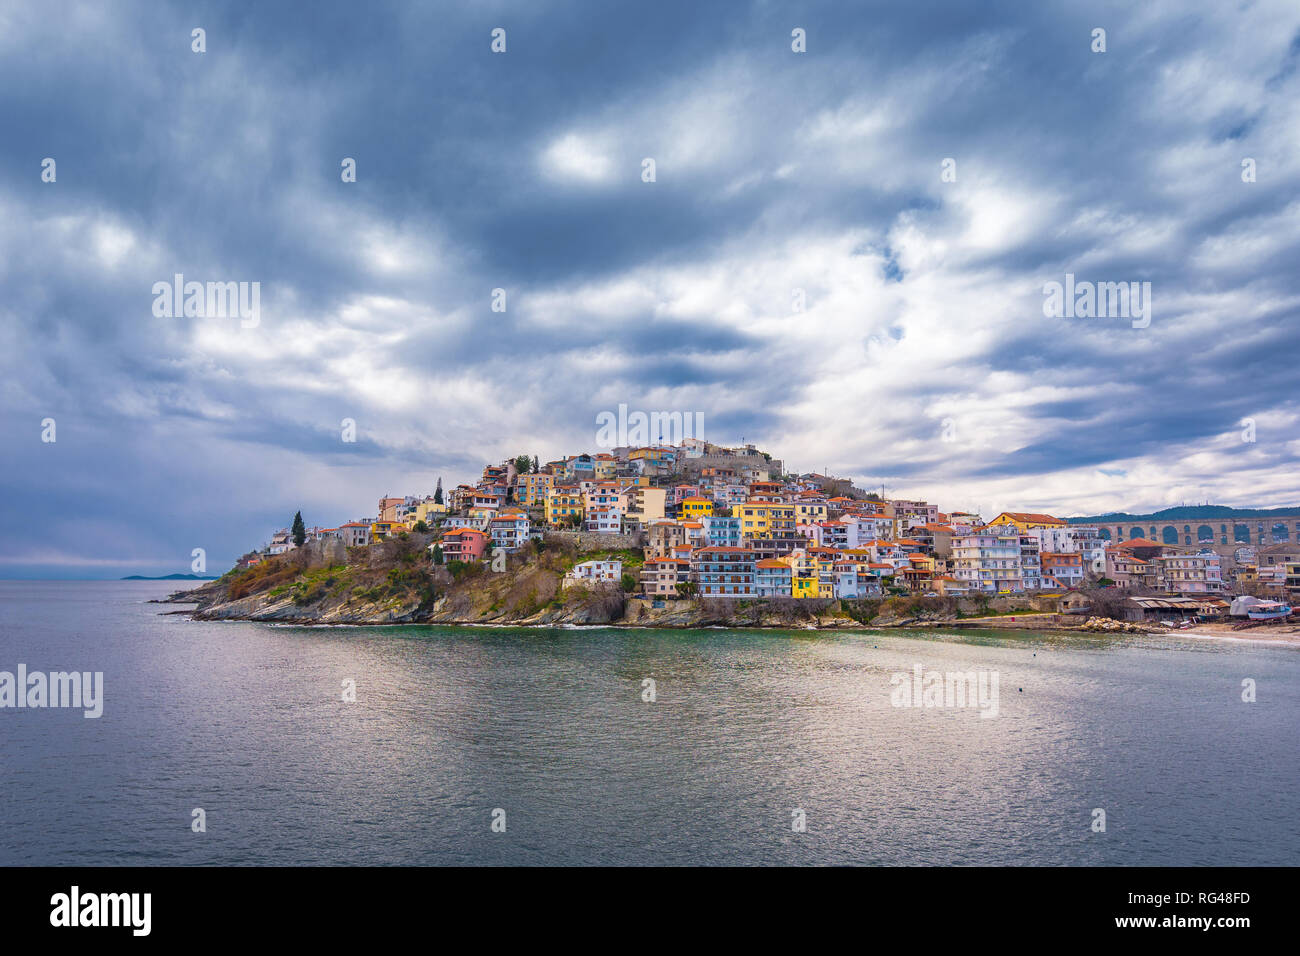 Old town of Kavala, East Macedonia and Thrace, Greece Stock Photo